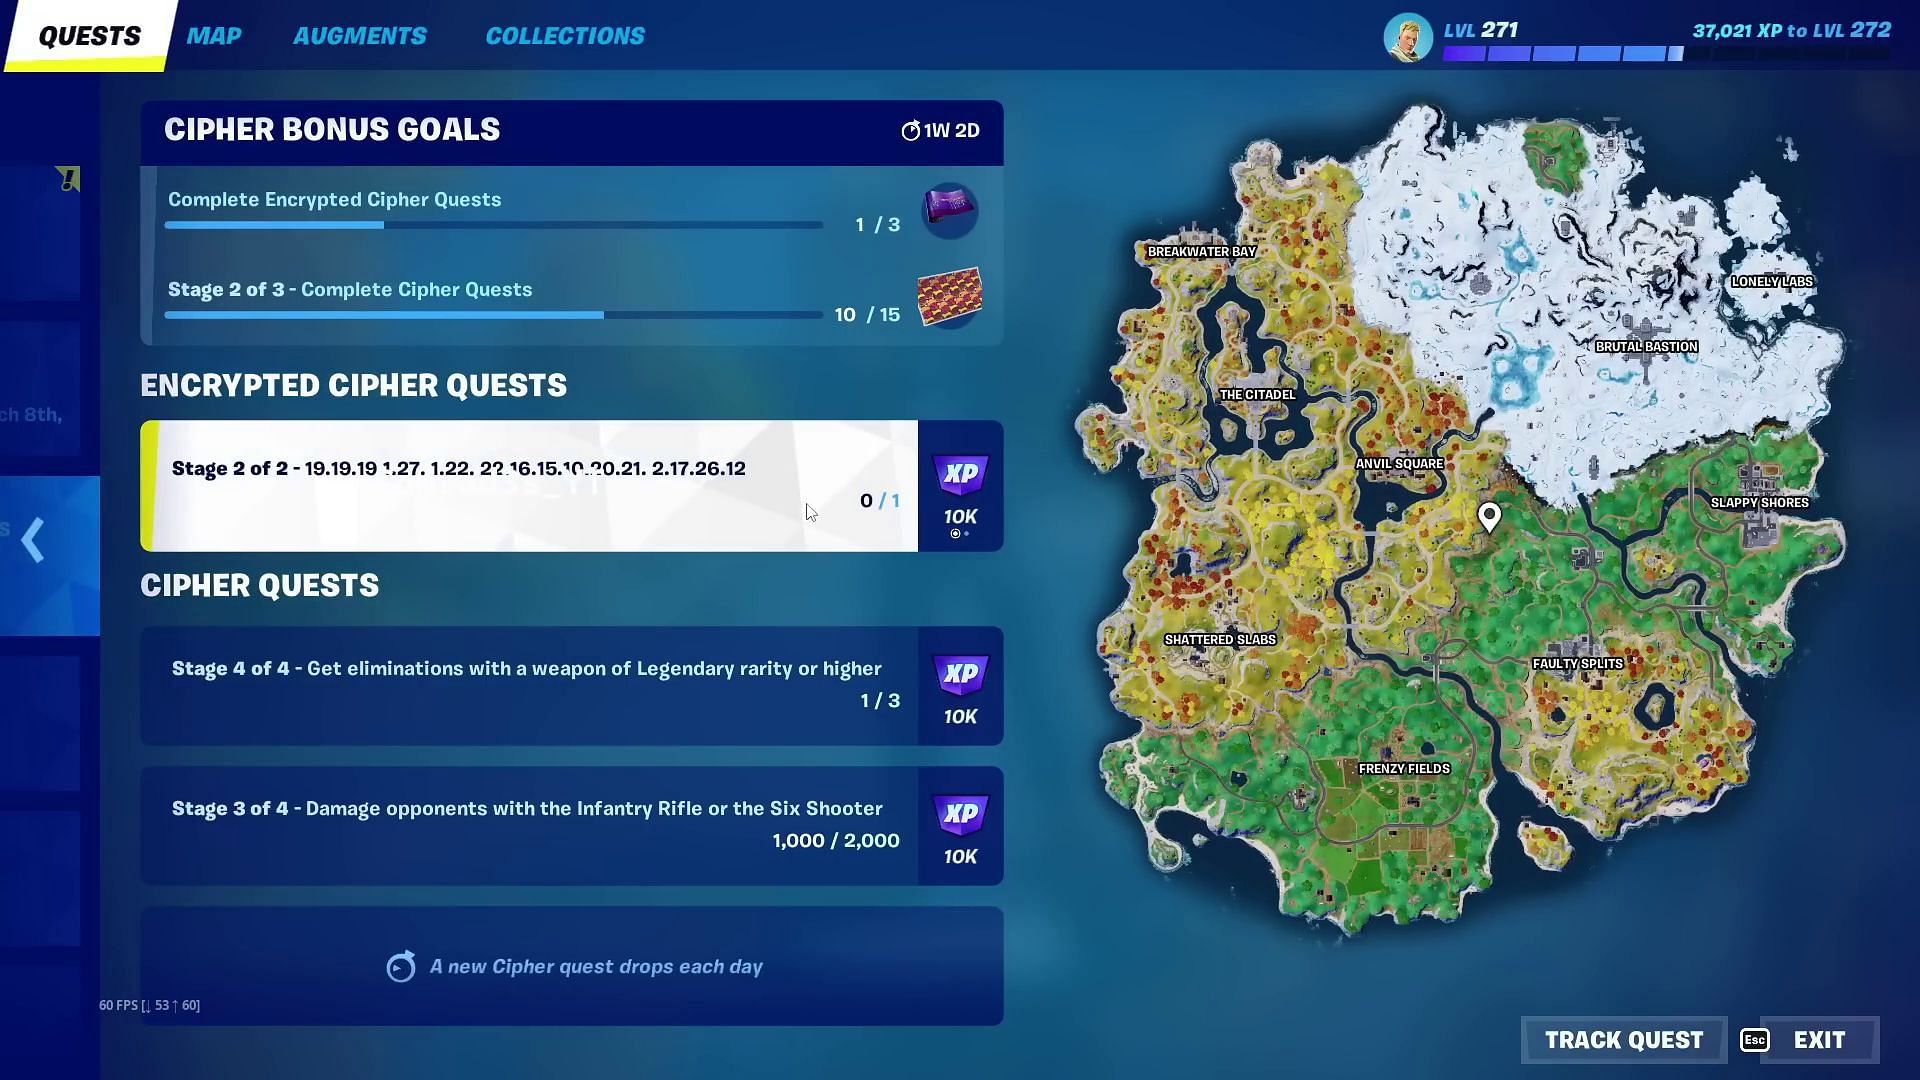 Quests Tab Page 2 in Fortnite (Image via YouTube/Comrad3s)